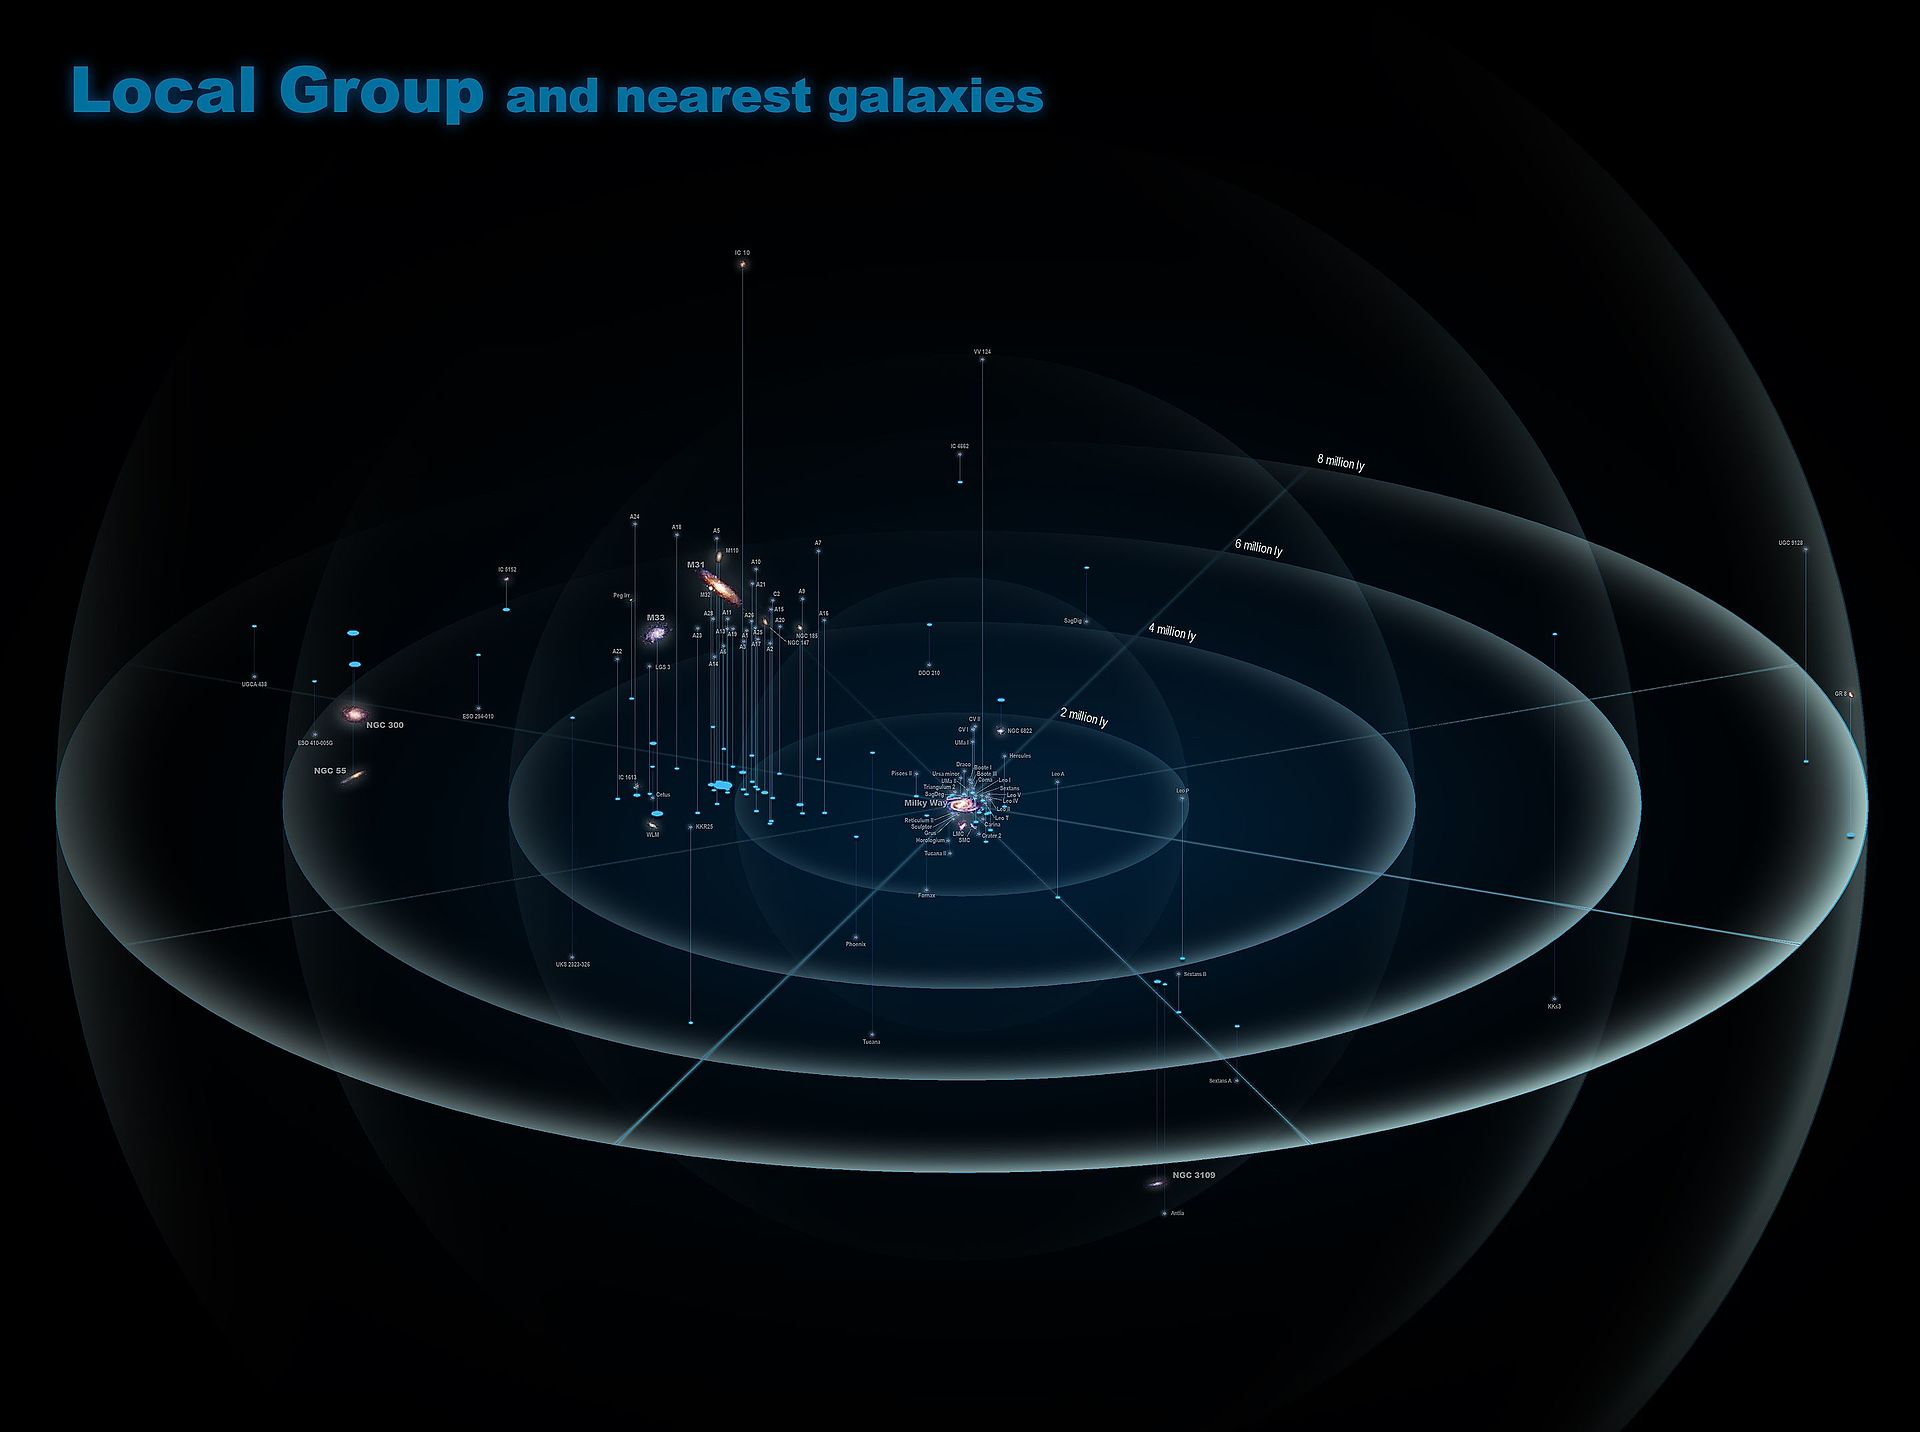 Local Group and nearest galaxies. (Wikipedia Commons/Antonio Ciccolella)